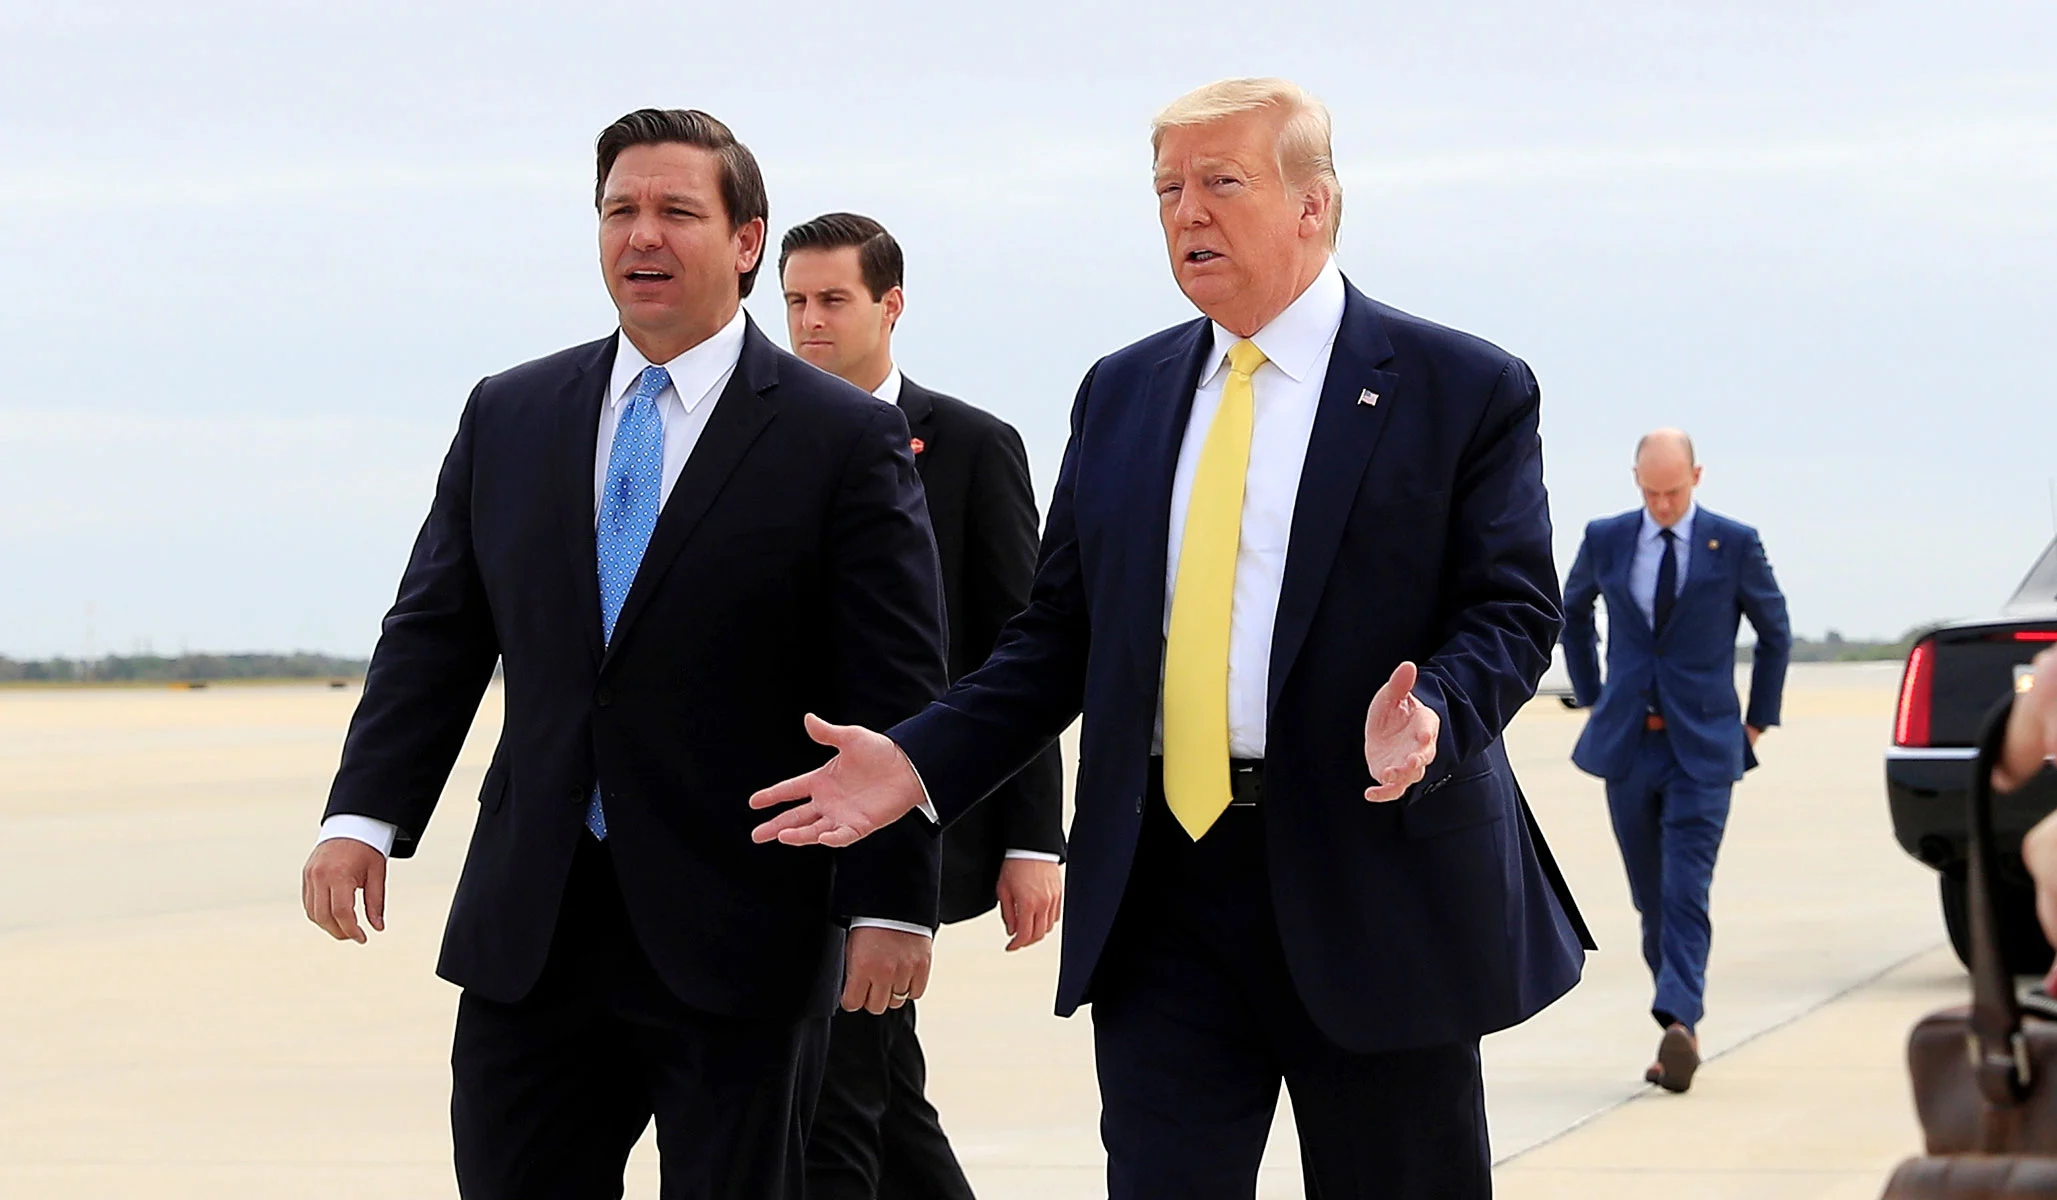 DeSantis the Governor of Florida is Casting a Shadow on Donald Trump’s Potential Run for President